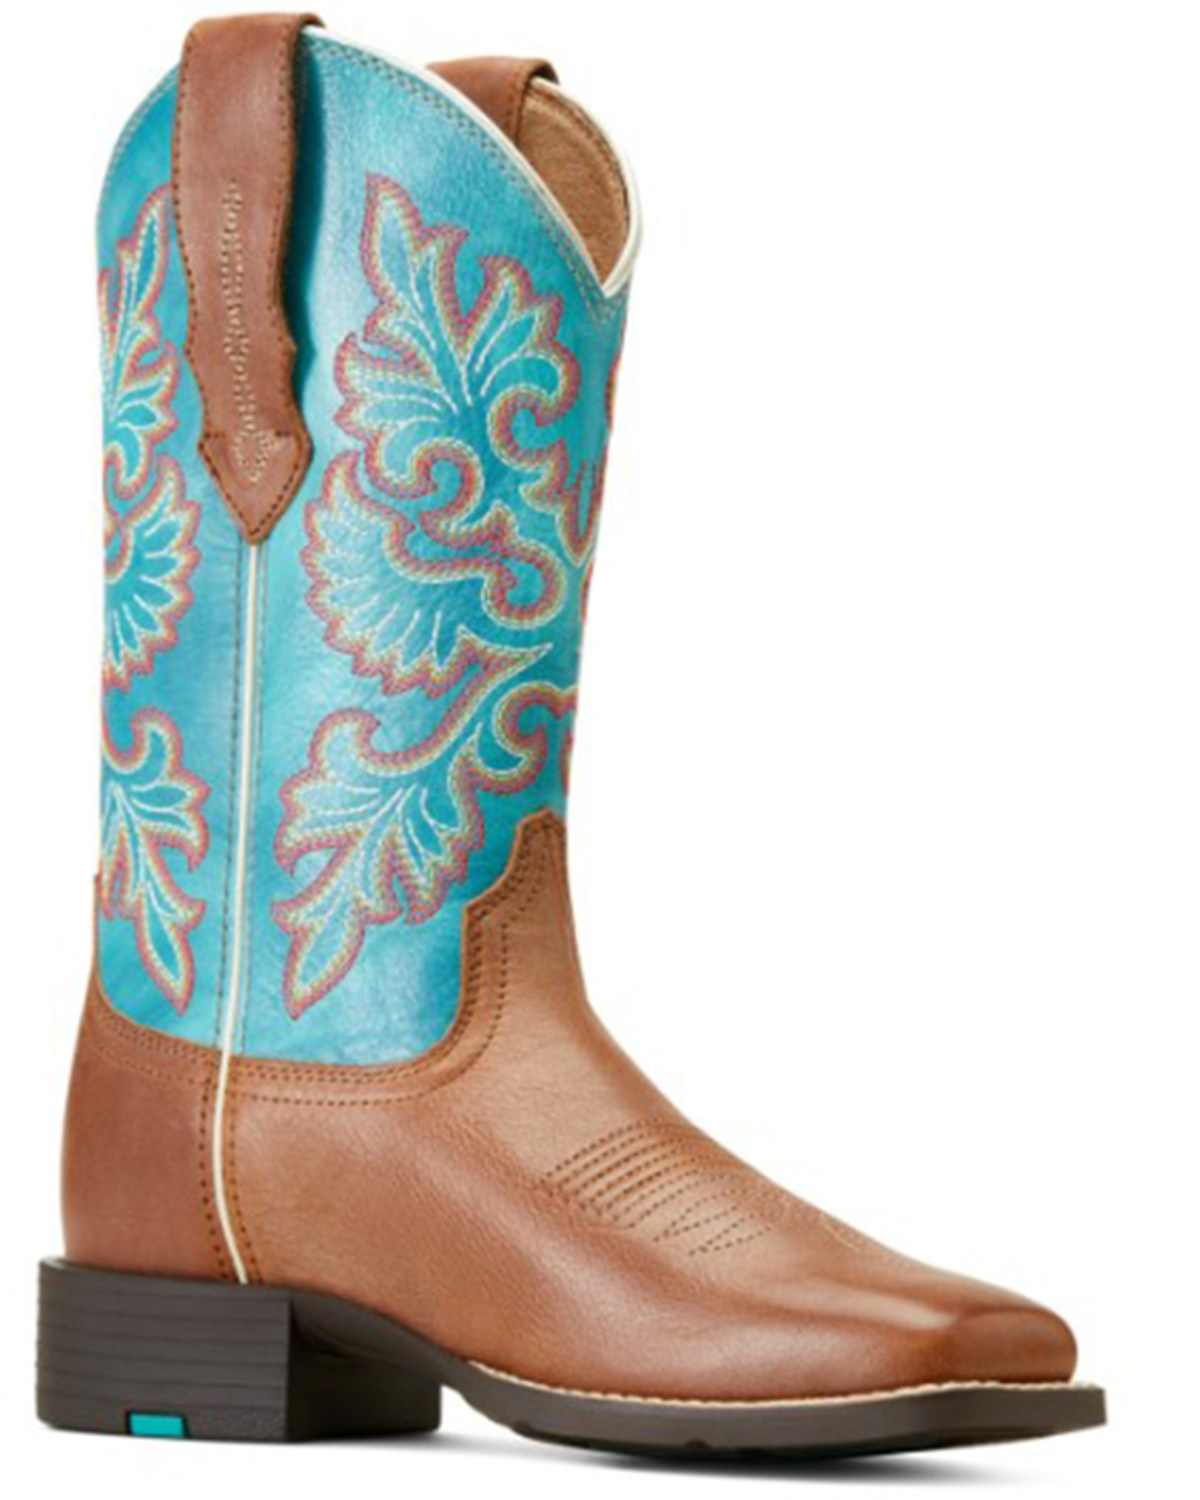 Ariat Women's Round Up StretchFit Western Boots - Broad Square Toe